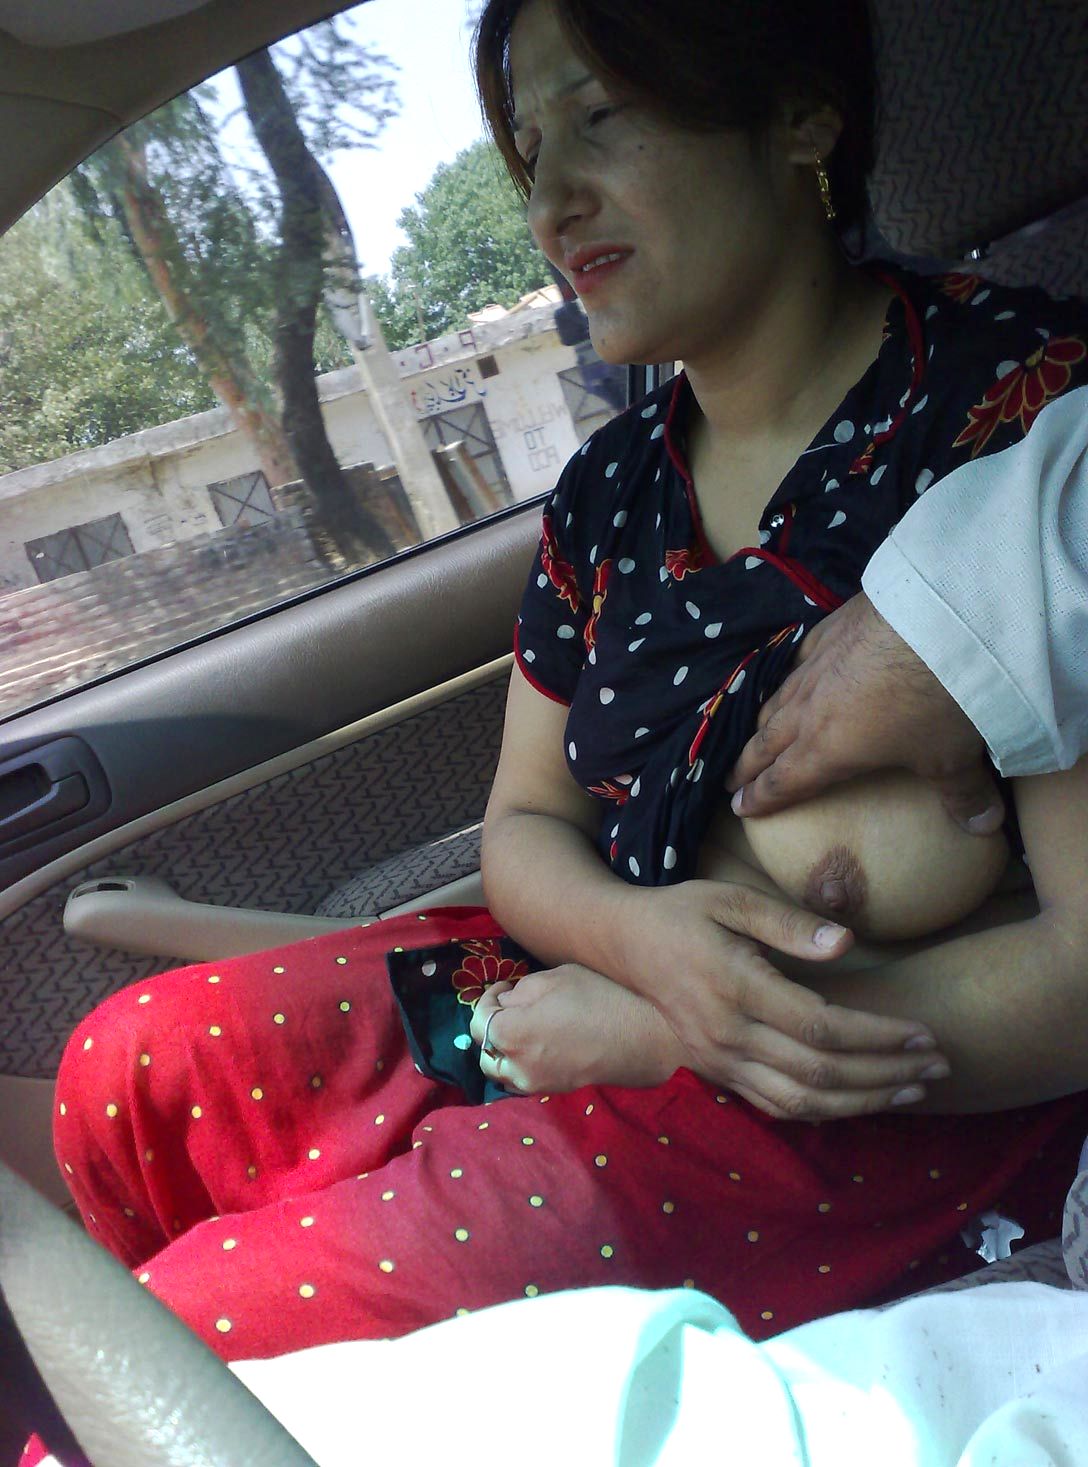 Desi Wife Boobs Exposing for Cab Driver Pics Indian Nude Girls